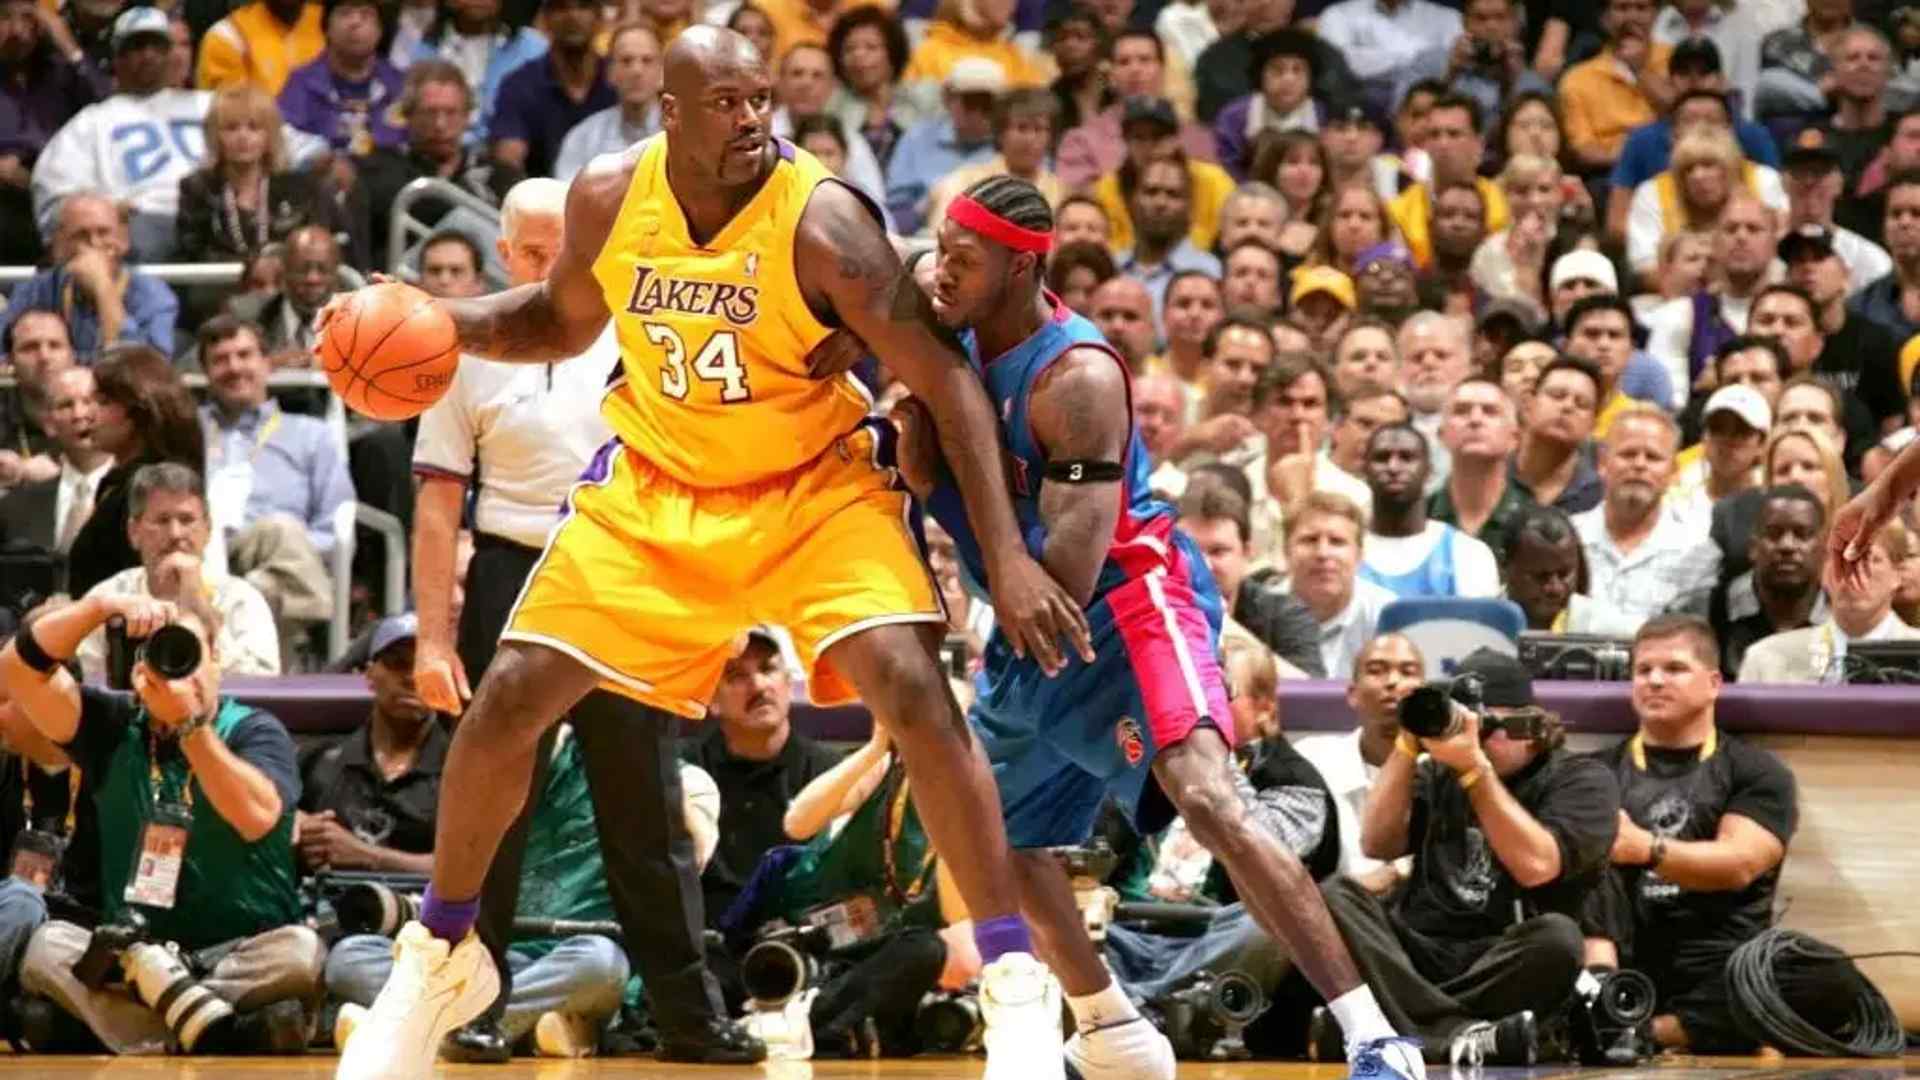 Shaquille O'Neal in a file photo. (Image credits: twitter)